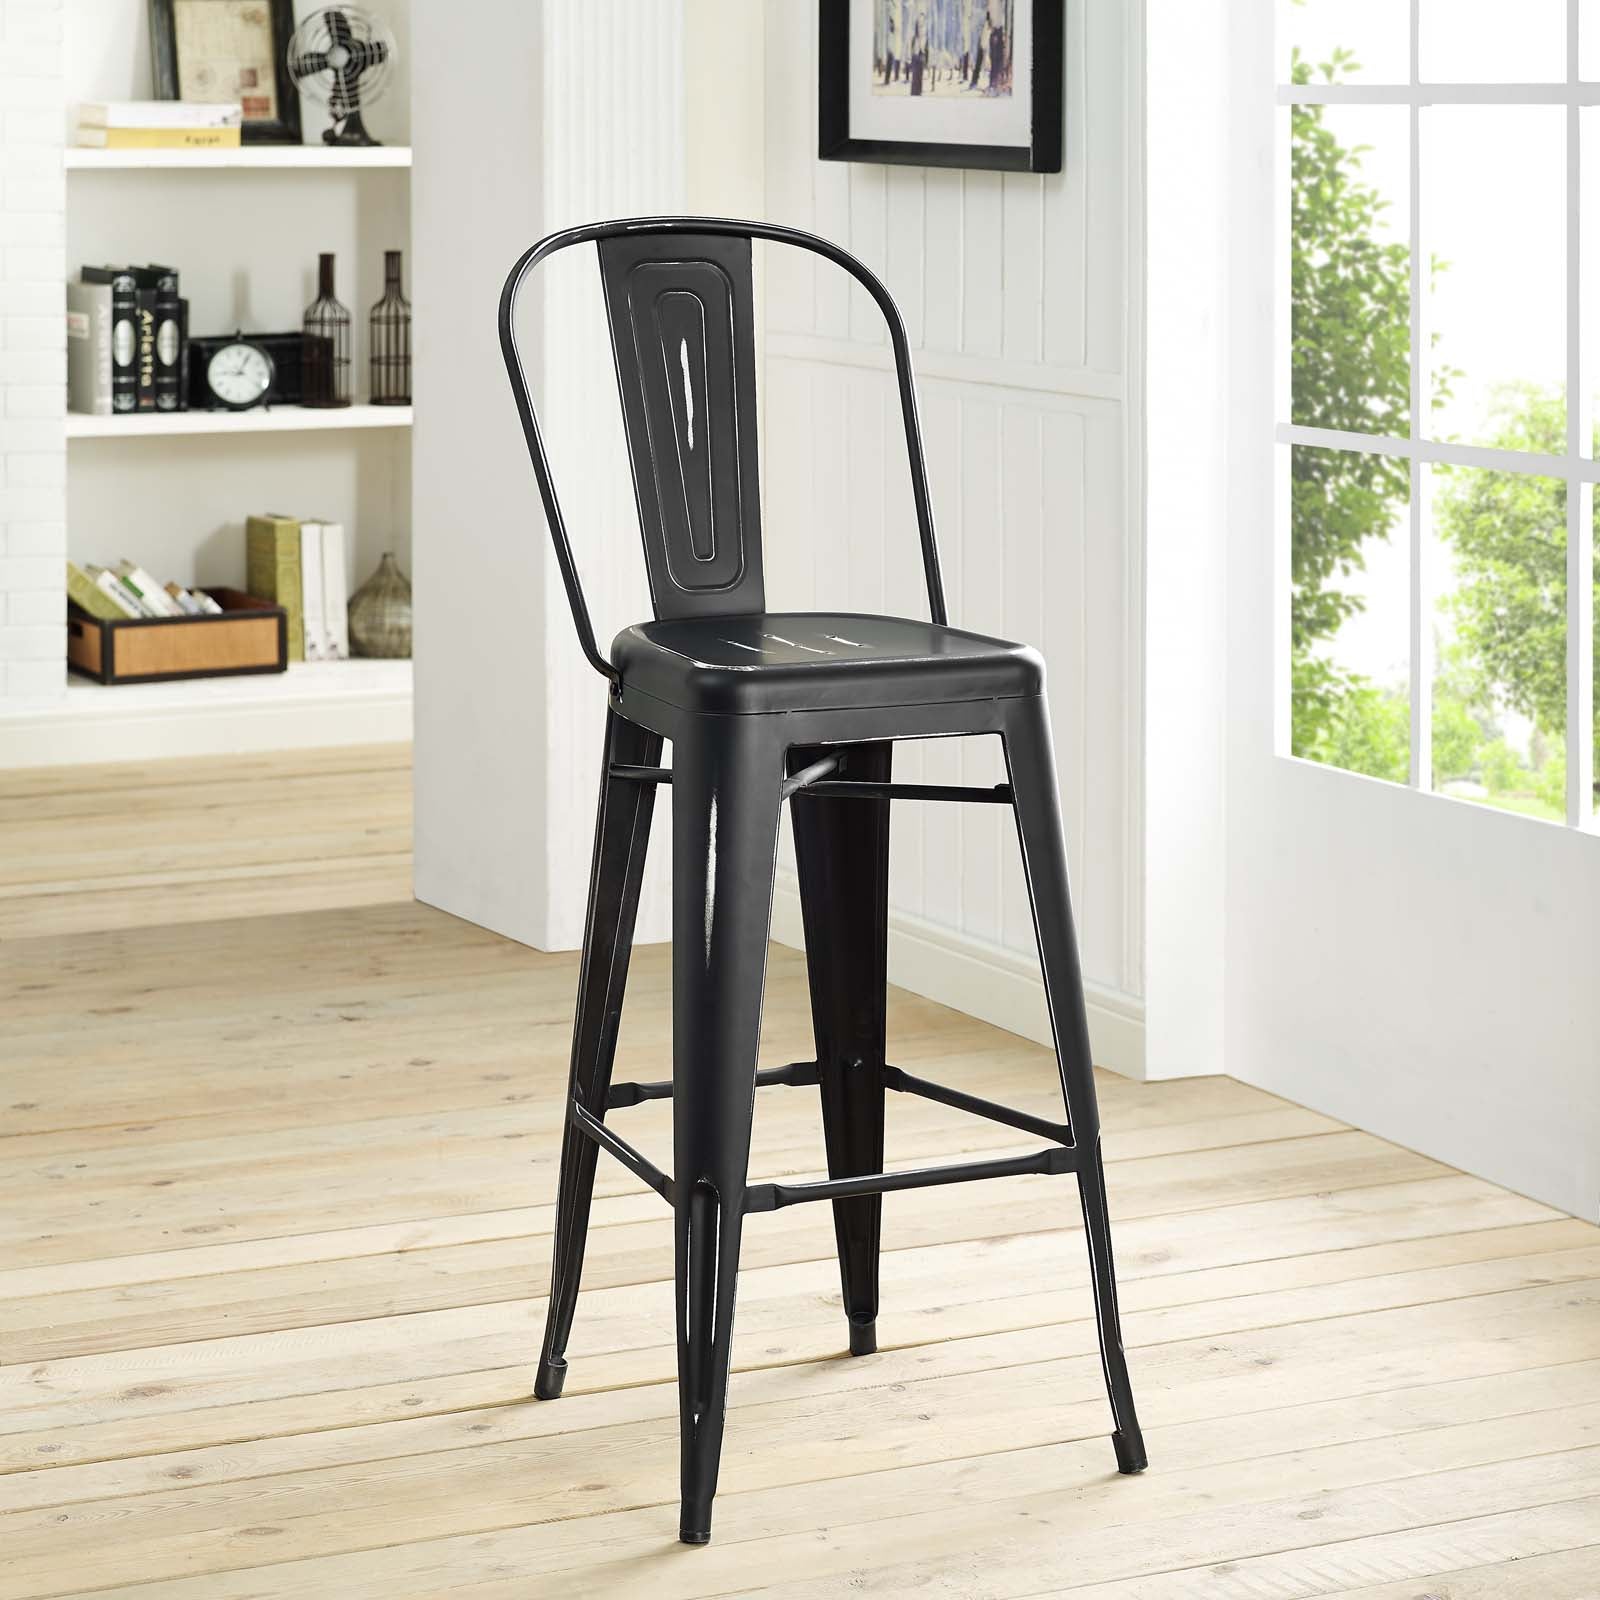 Industrial Promenade Metal Bistro Side Bar Stool With Arms - Farmhouse Bar Chairs